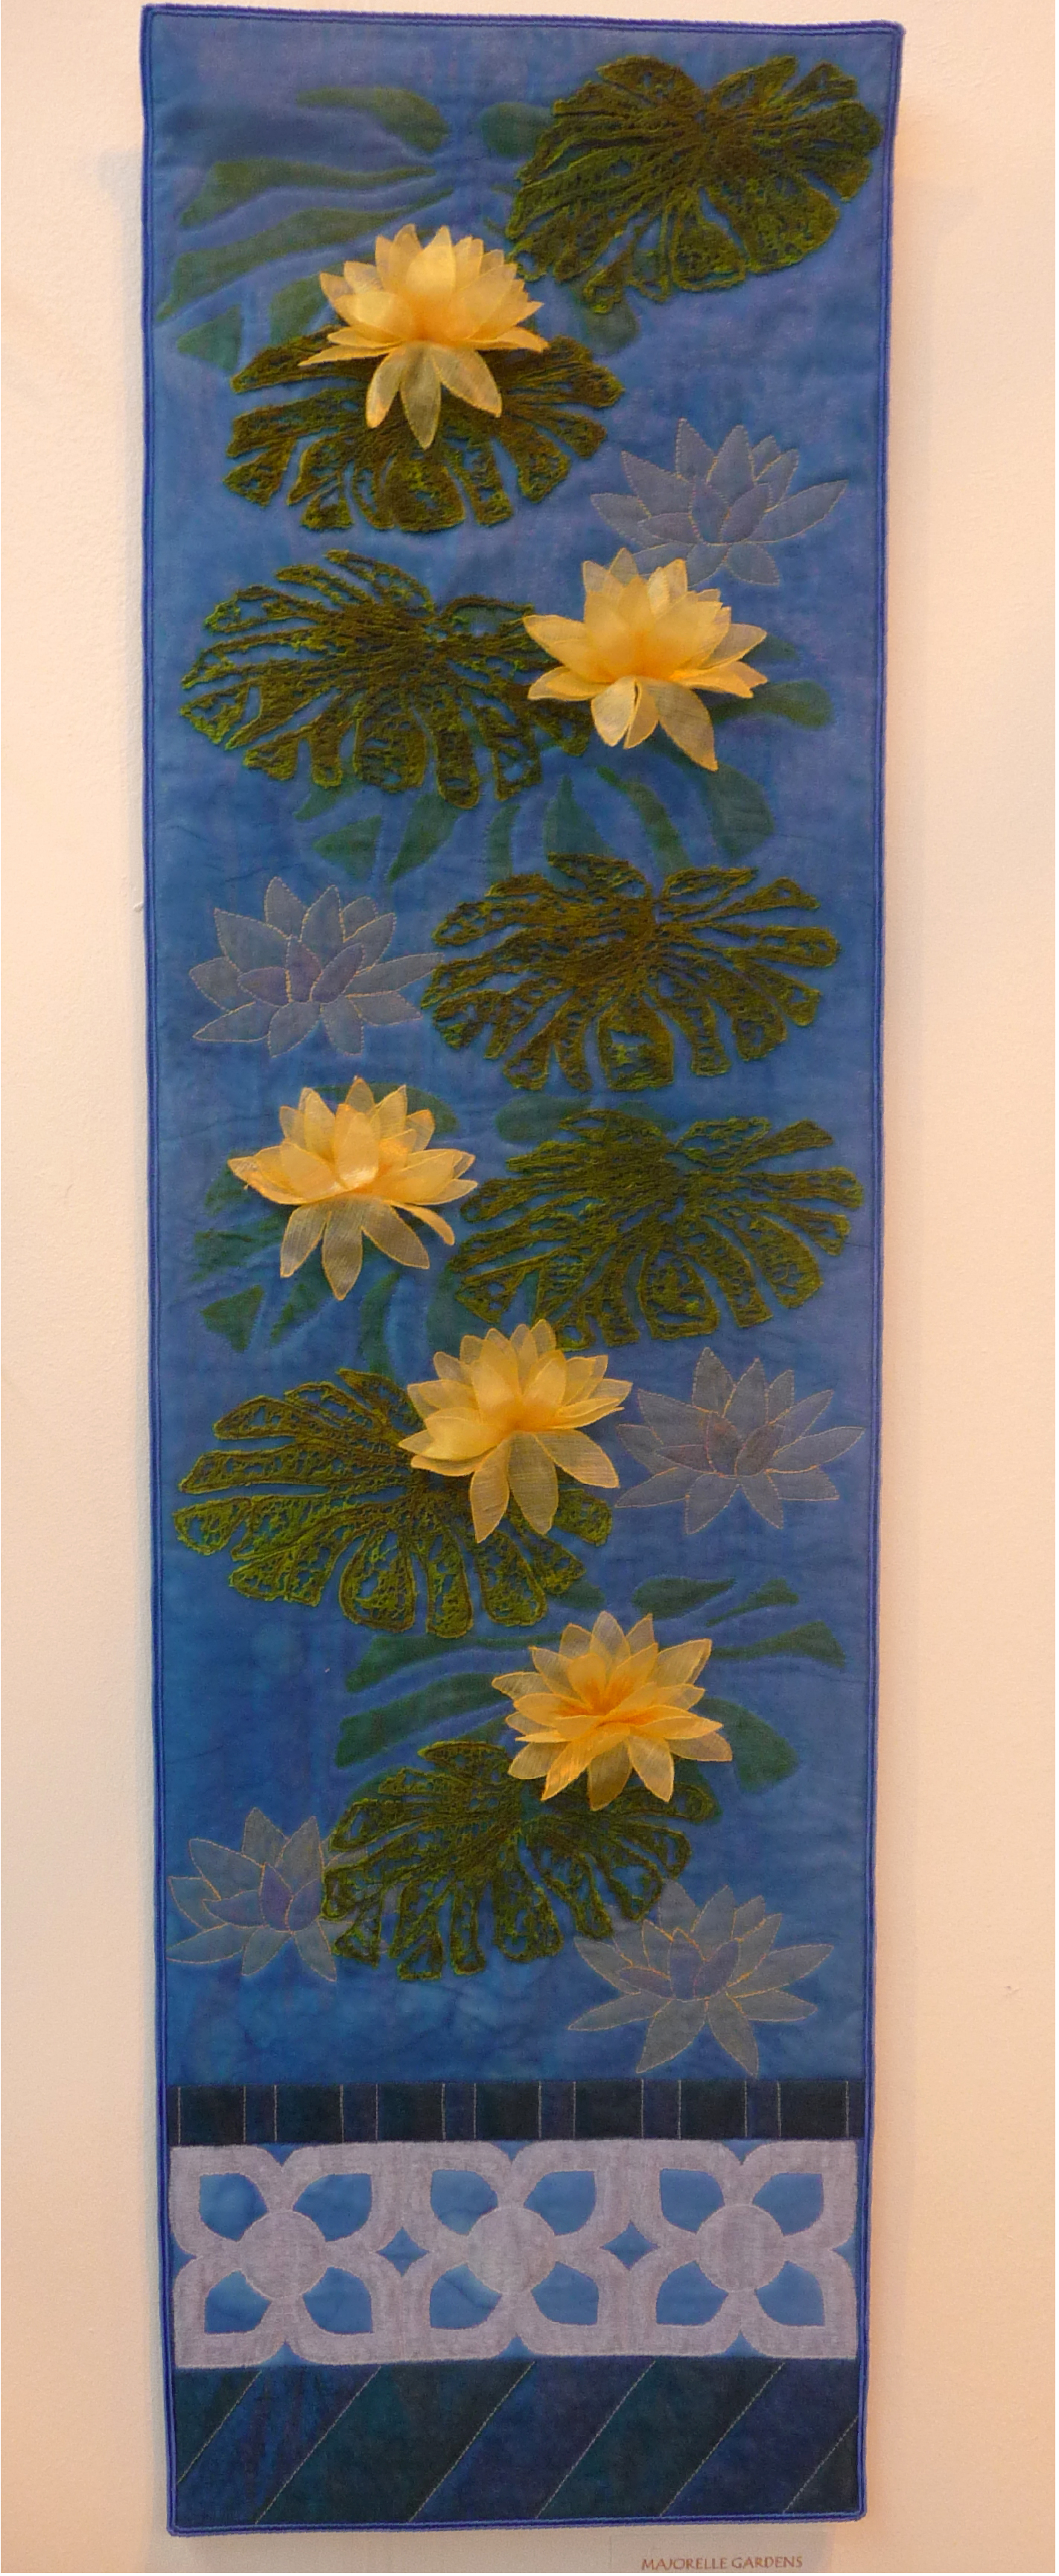 MAJORELLE GARDENS (Waterlilies) by Pauline Barnes from Tangent Textiles